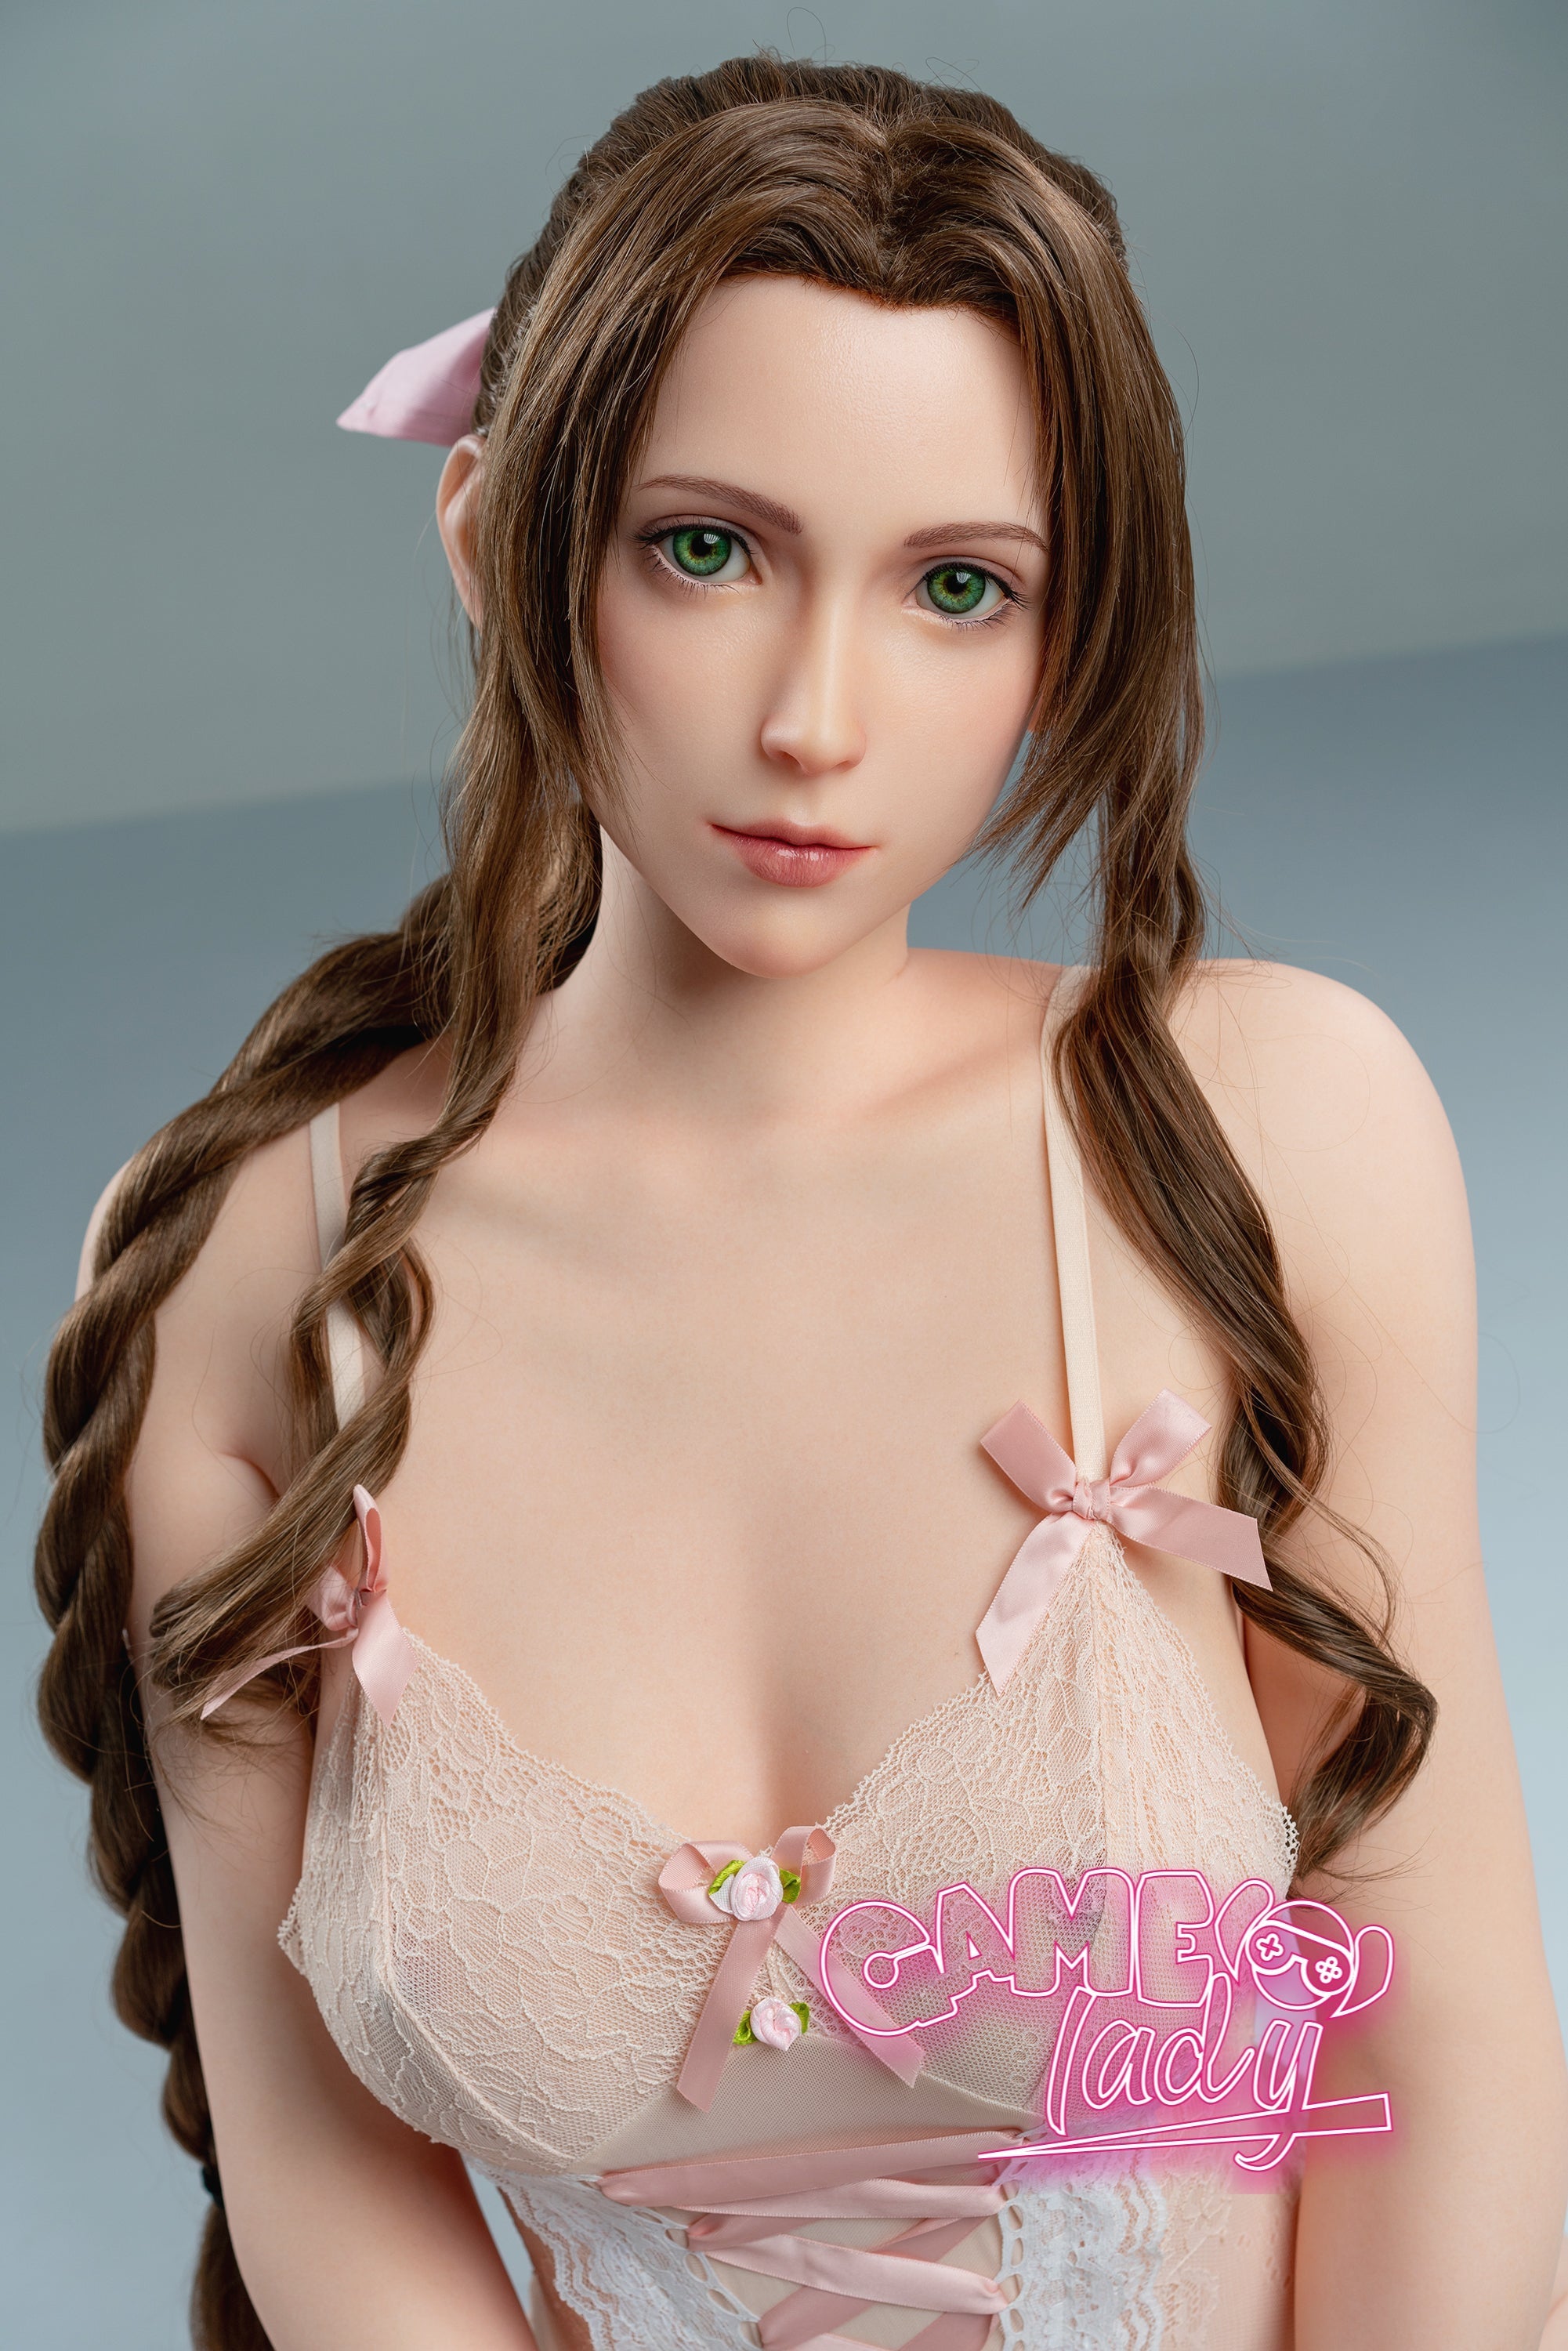 Game Lady 168 cm Silicone - Aerith (CN) | Buy Sex Dolls at DOLLS ACTUALLY